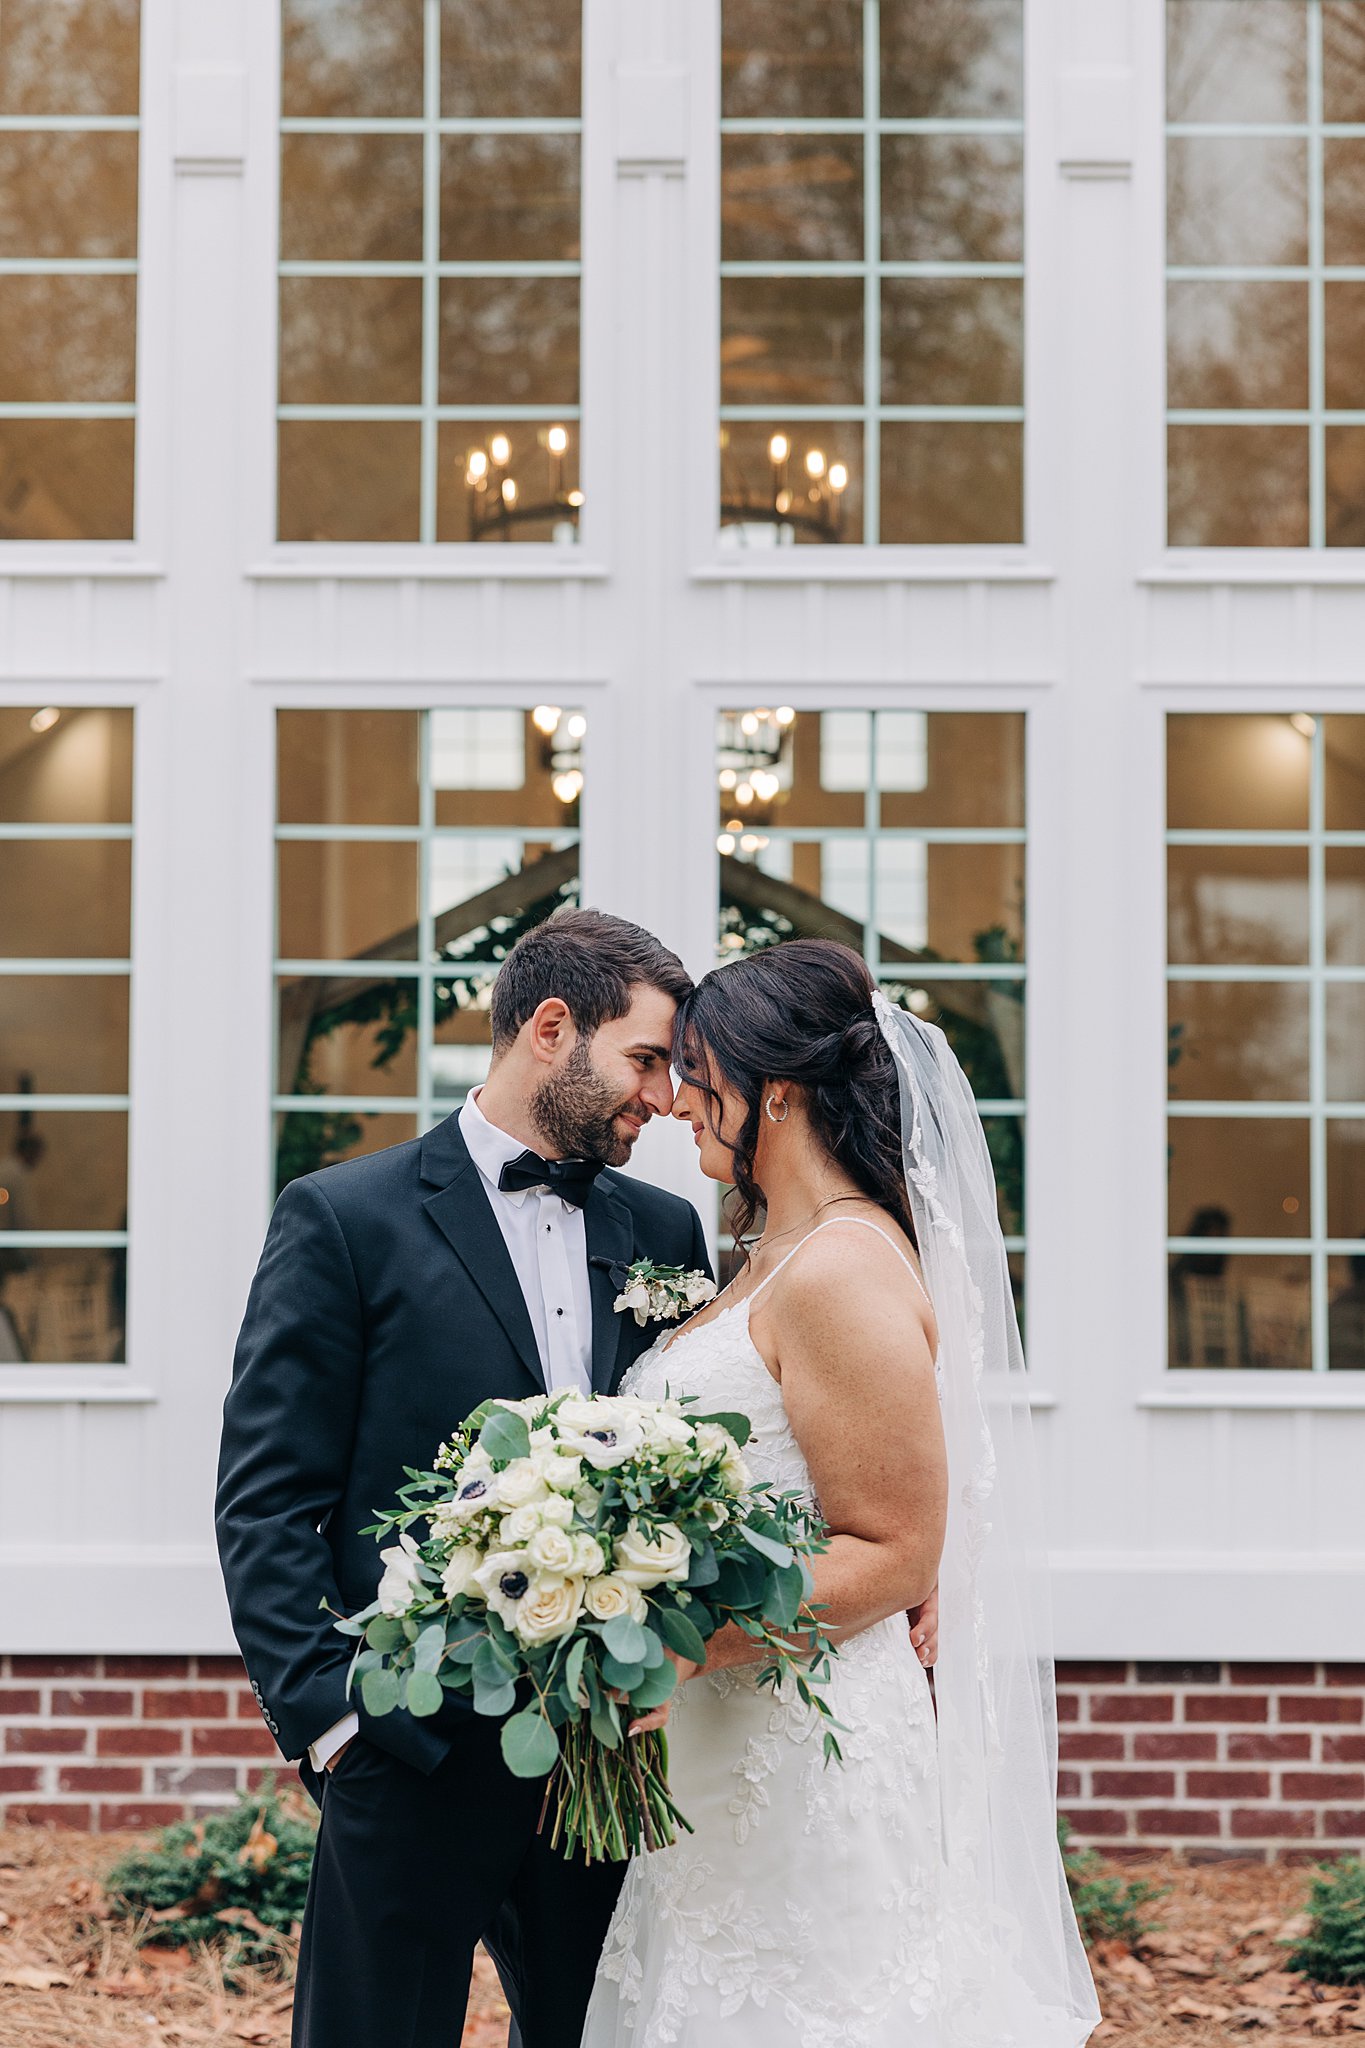 Newlyweds touch foreheads while sharing a quiet moment in a garden in a black tux and white lace dress